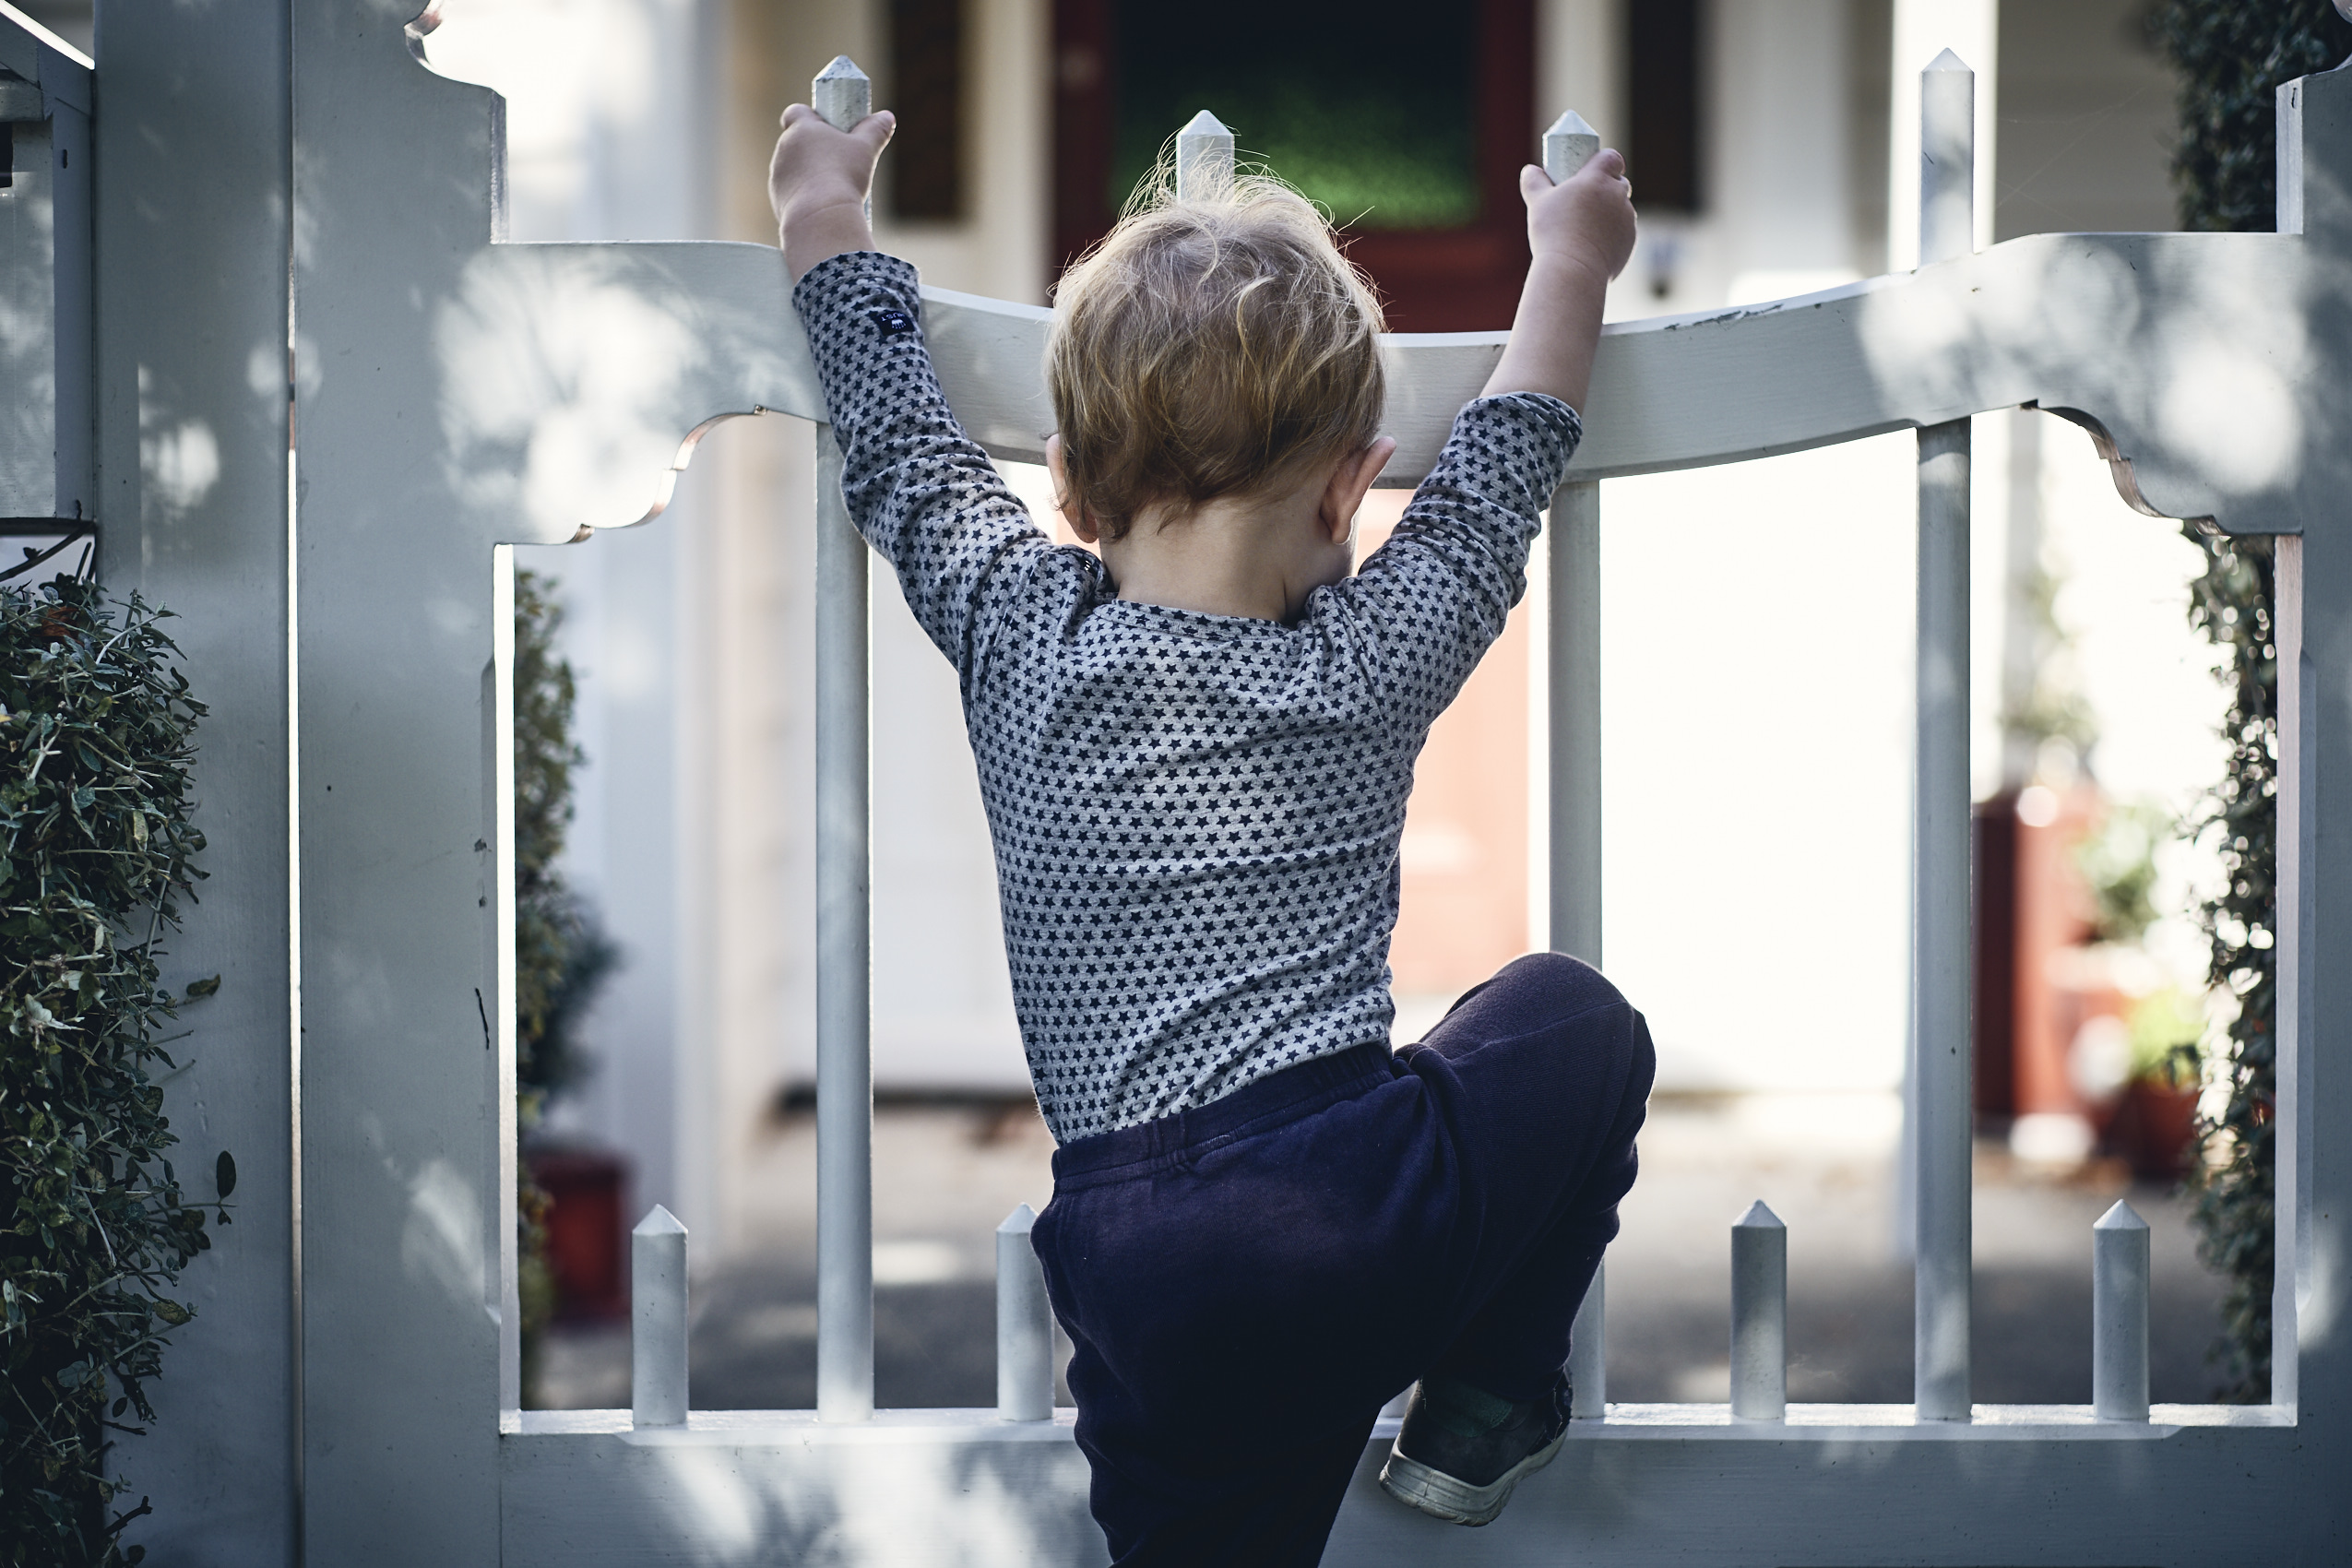 Lockdown • Toddler Climbing Front Wooden Gate • Lifestyle & Portrait Photography